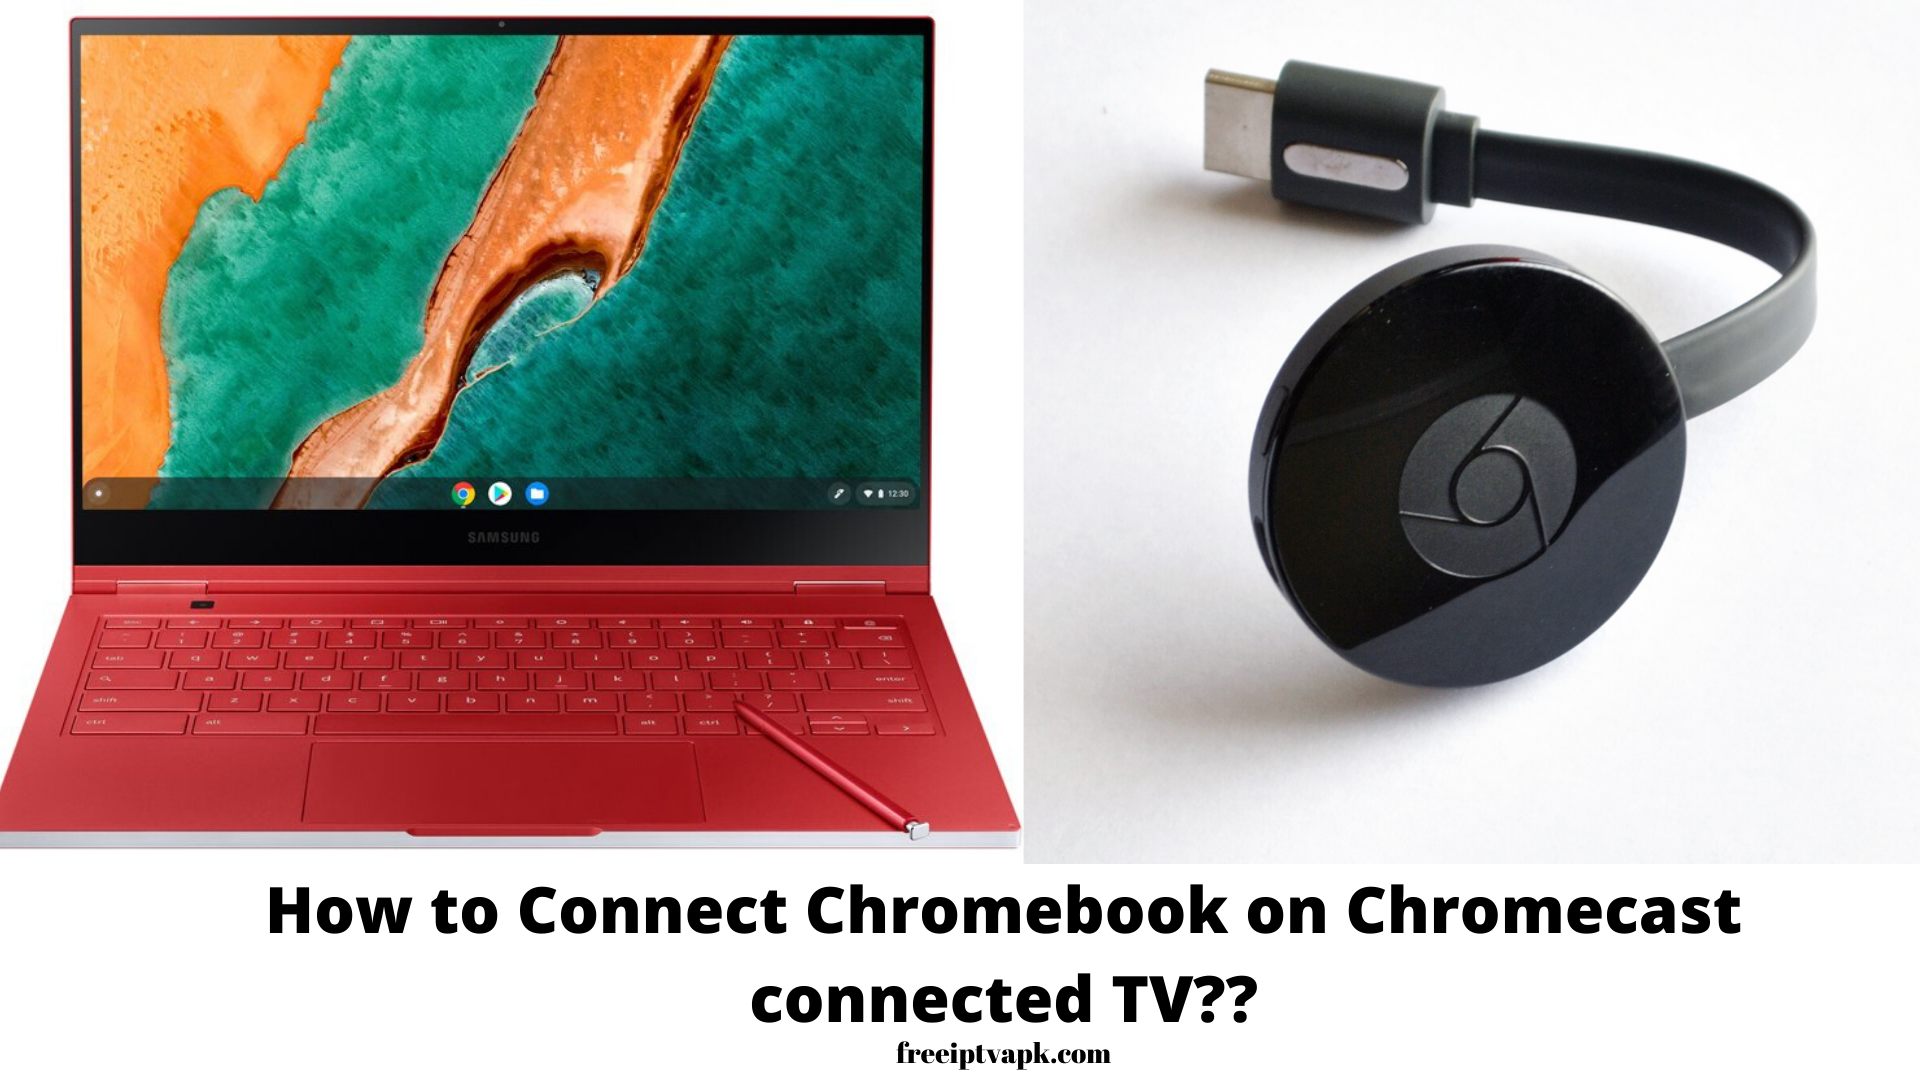 How to Connect Chromebook on Chromecast connected TV?